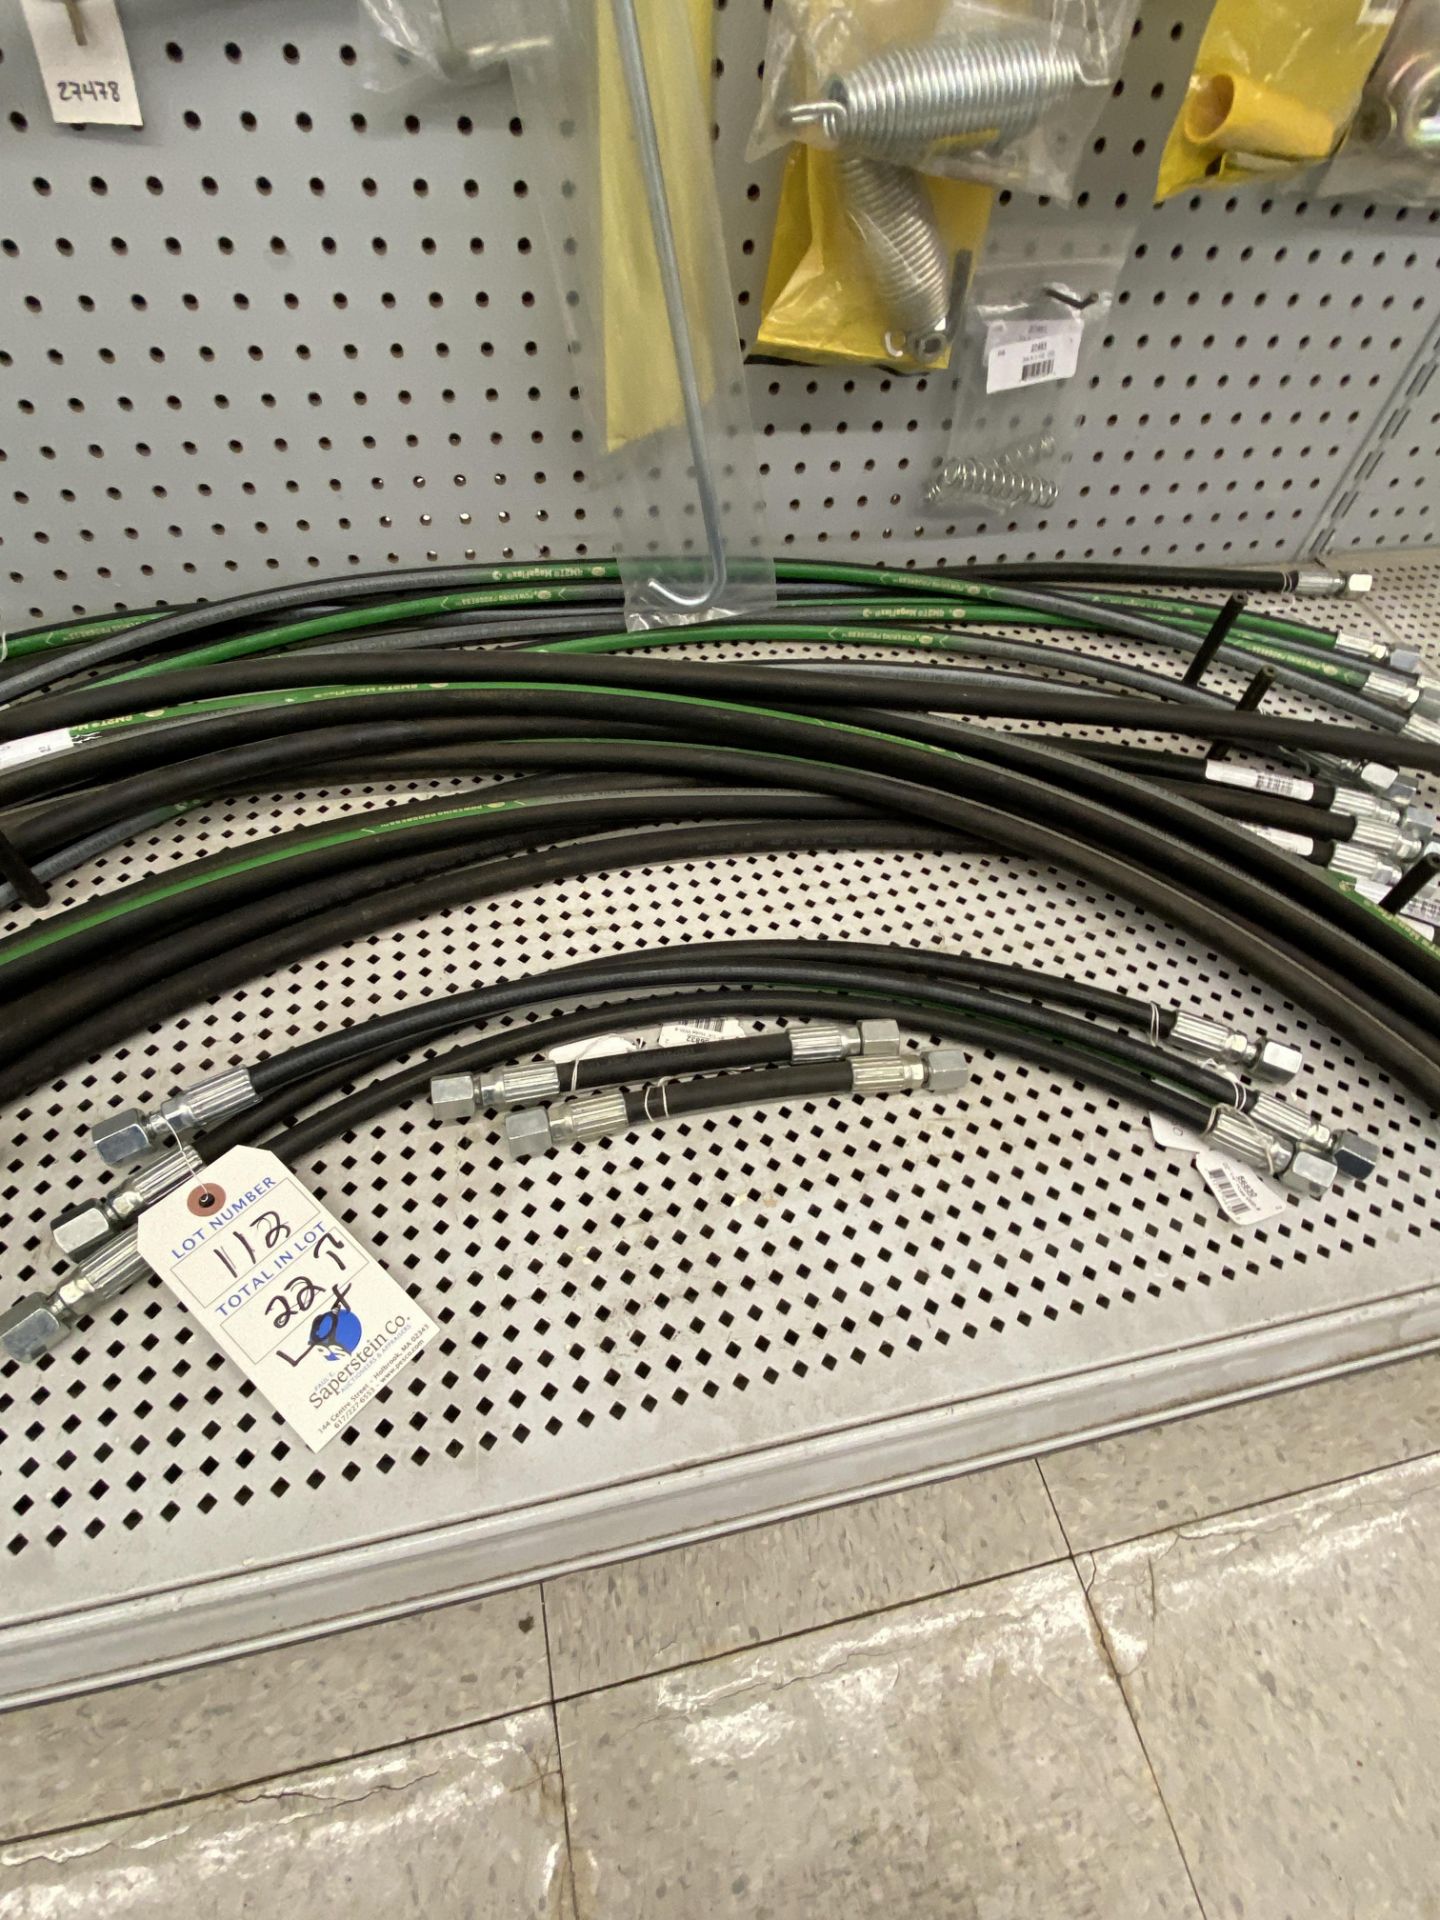 {LOT} (22) Asst. Fisher Hydraulic Hose for Lift and Angle Wholesale Value: 35 Each - Image 5 of 8